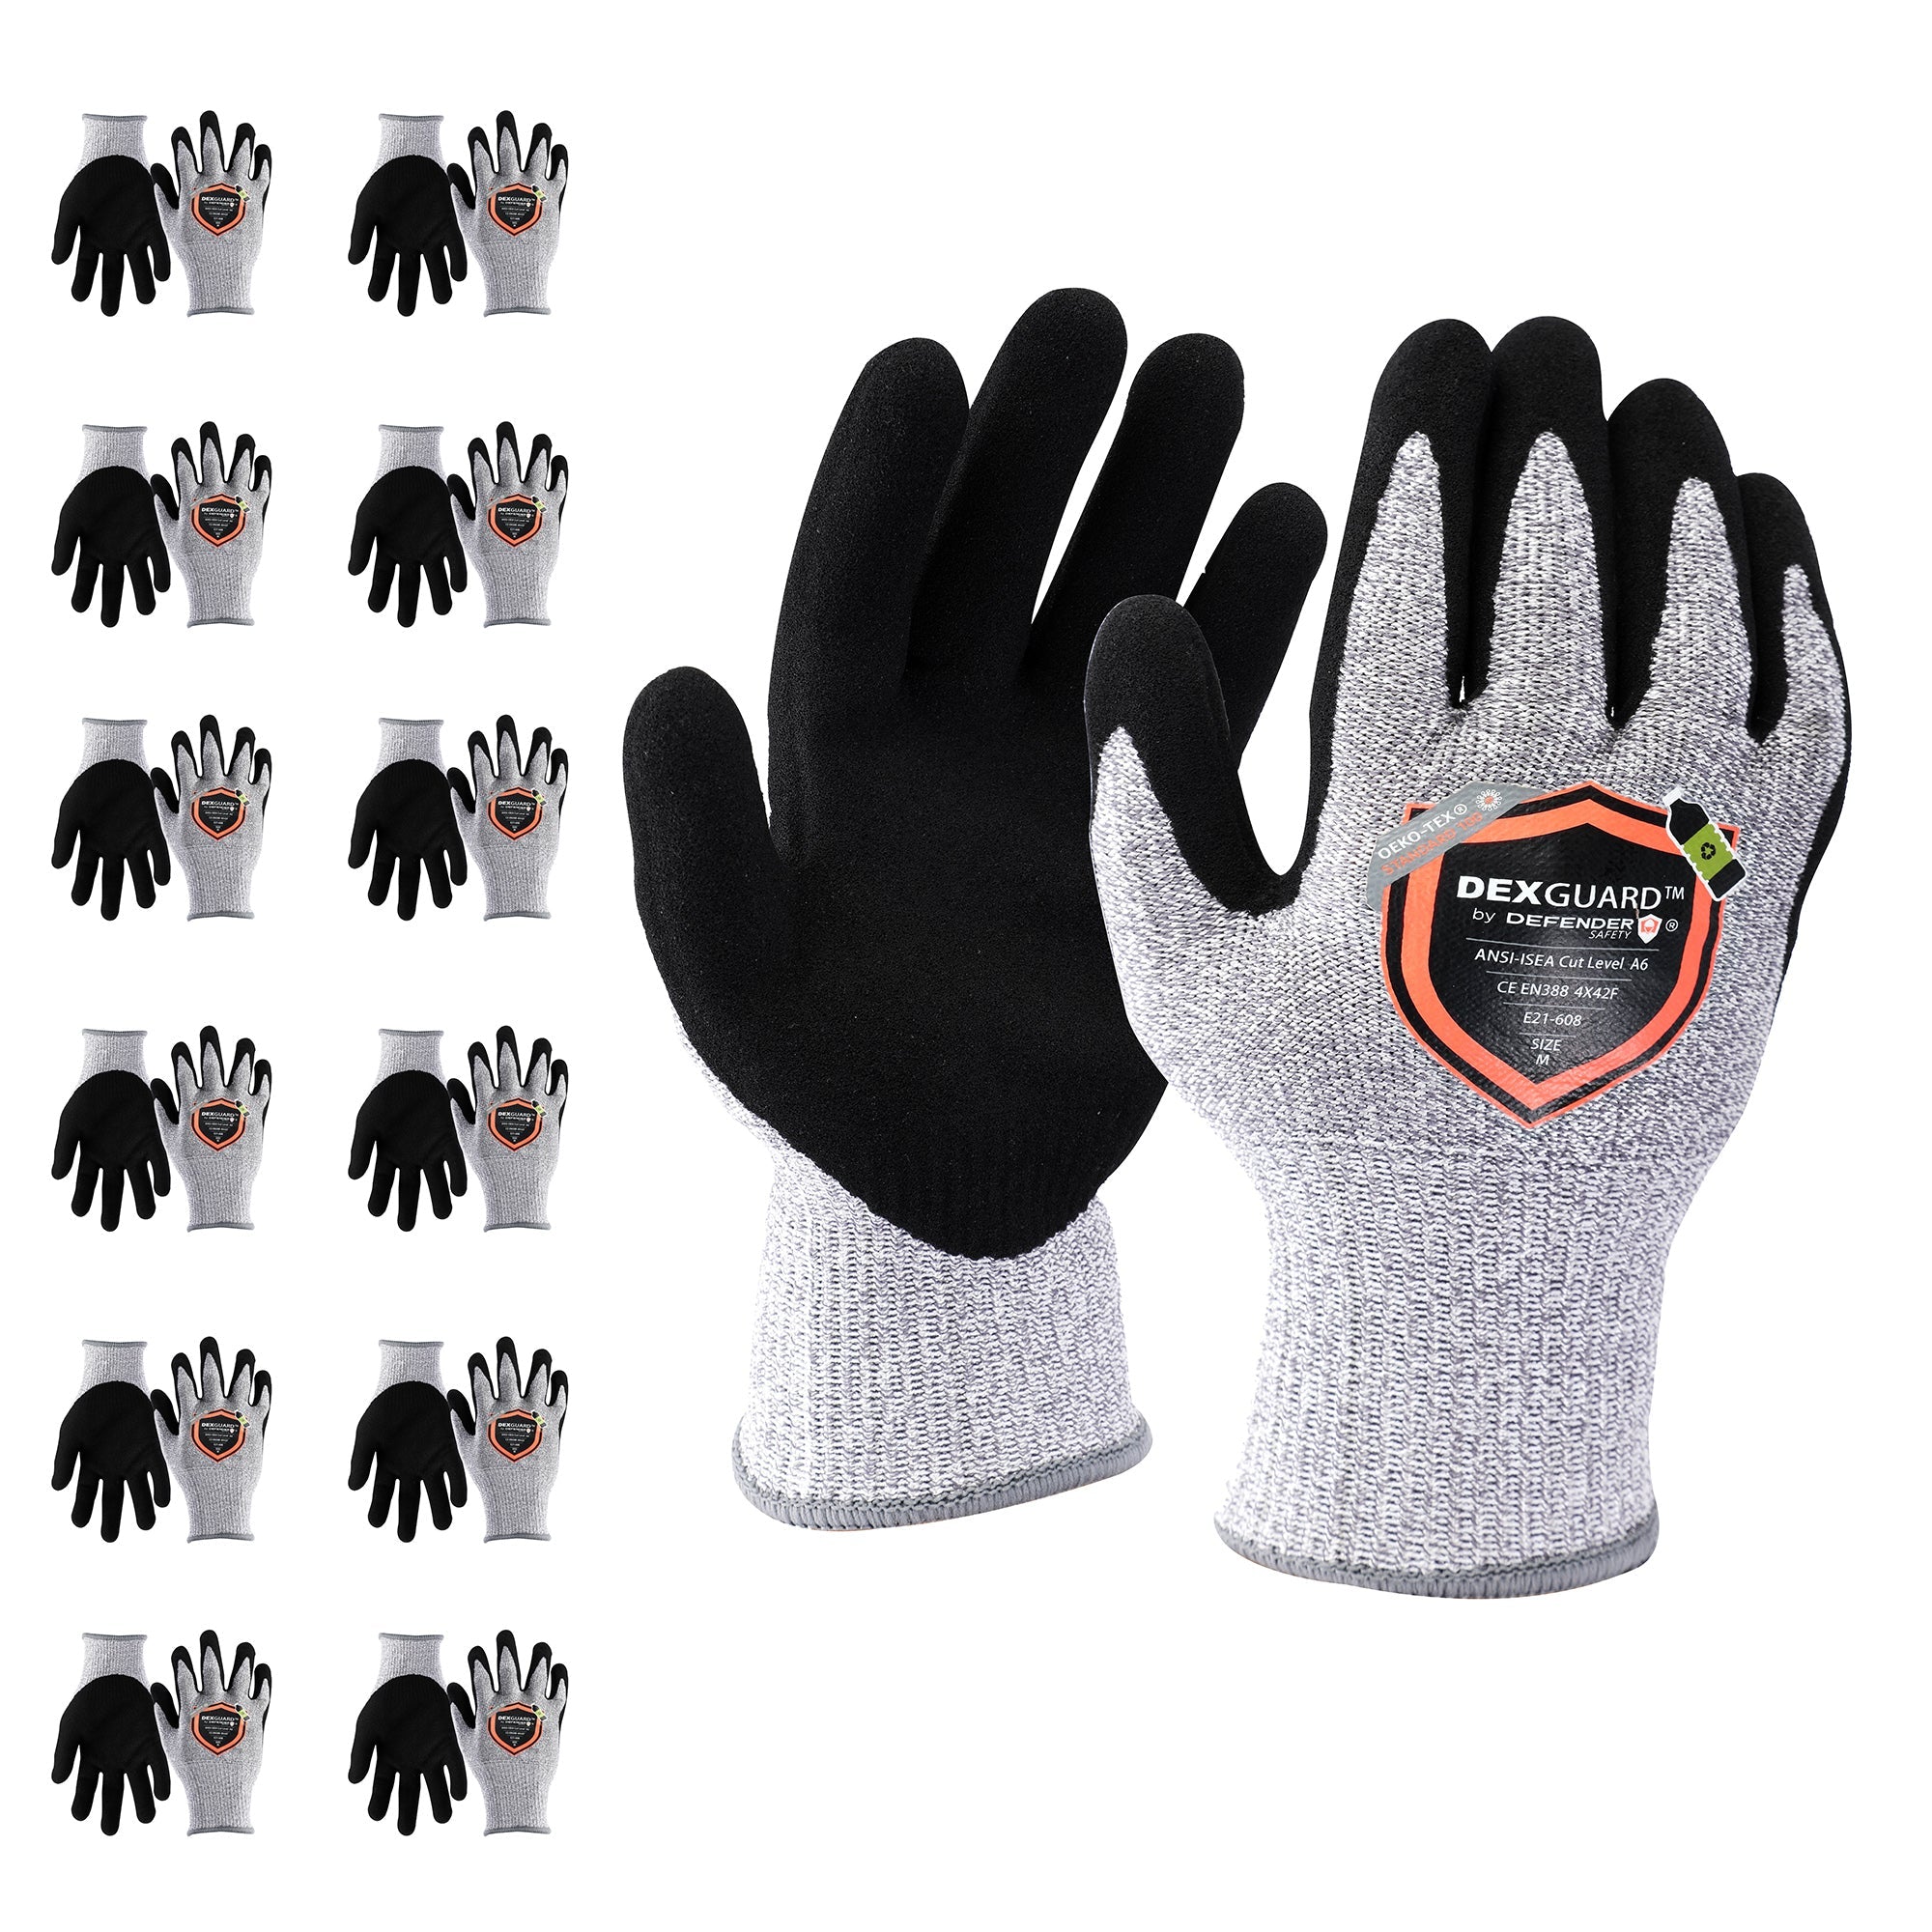 https://defendersafety.com/cdn/shop/products/dexguard-a6-cut-gloves-level-4-abrasion-resistant-textured-nitrile-coating-touch-screen-compatible-378000.jpg?v=1692319923&width=2000